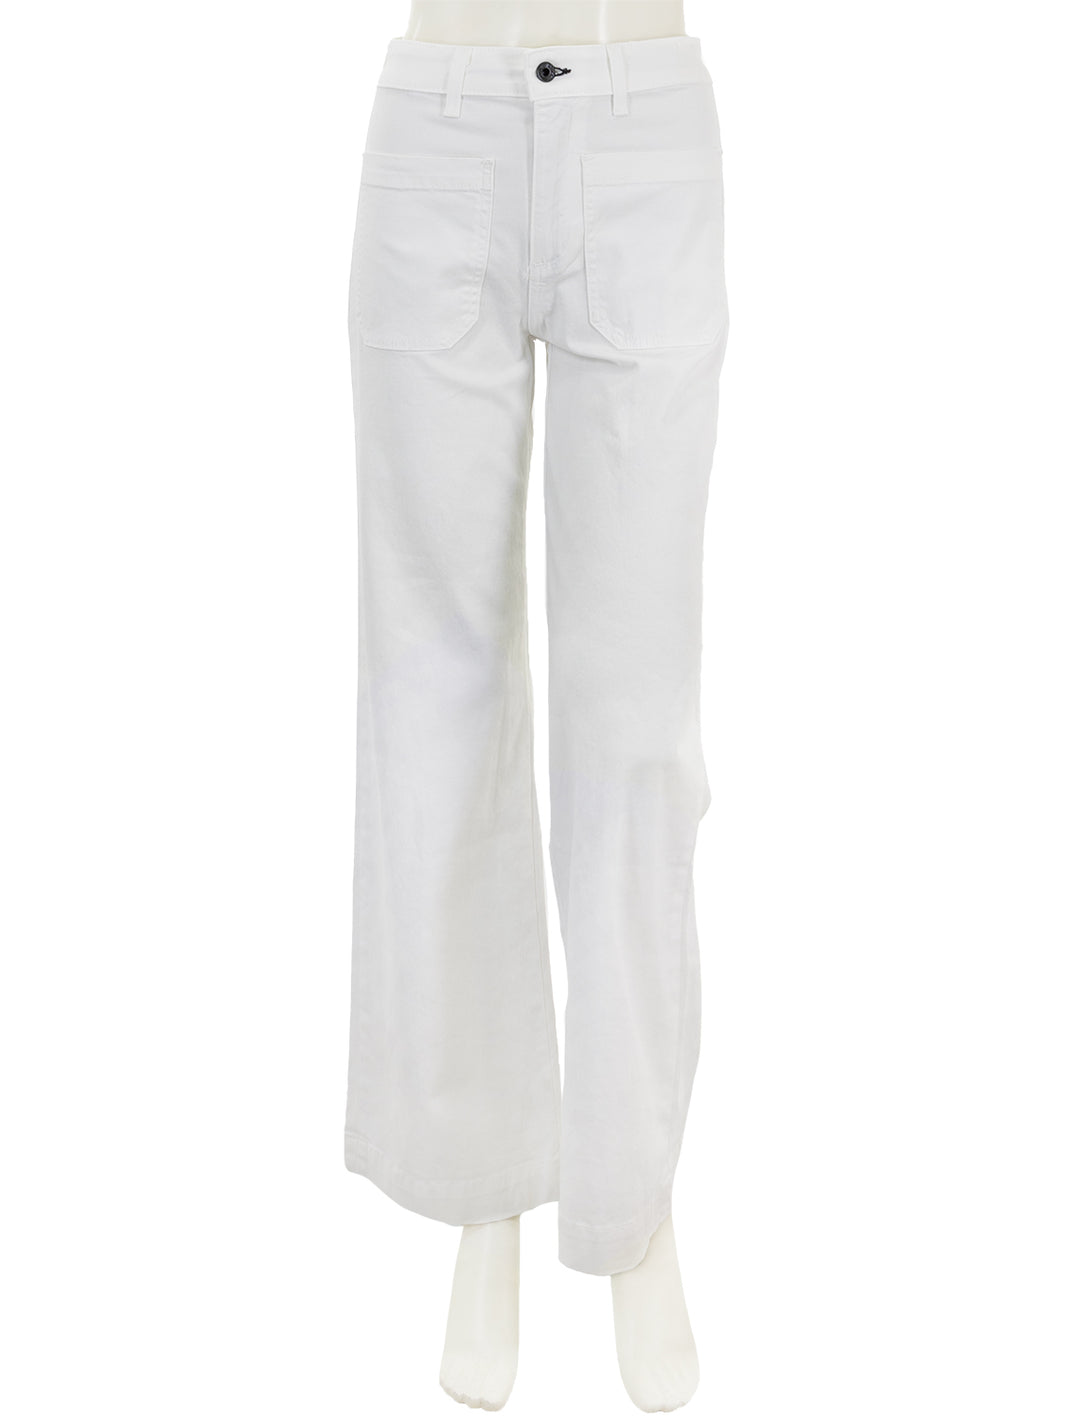 Front view of ASKK NY's Sailor Twill Pant in Ivory.